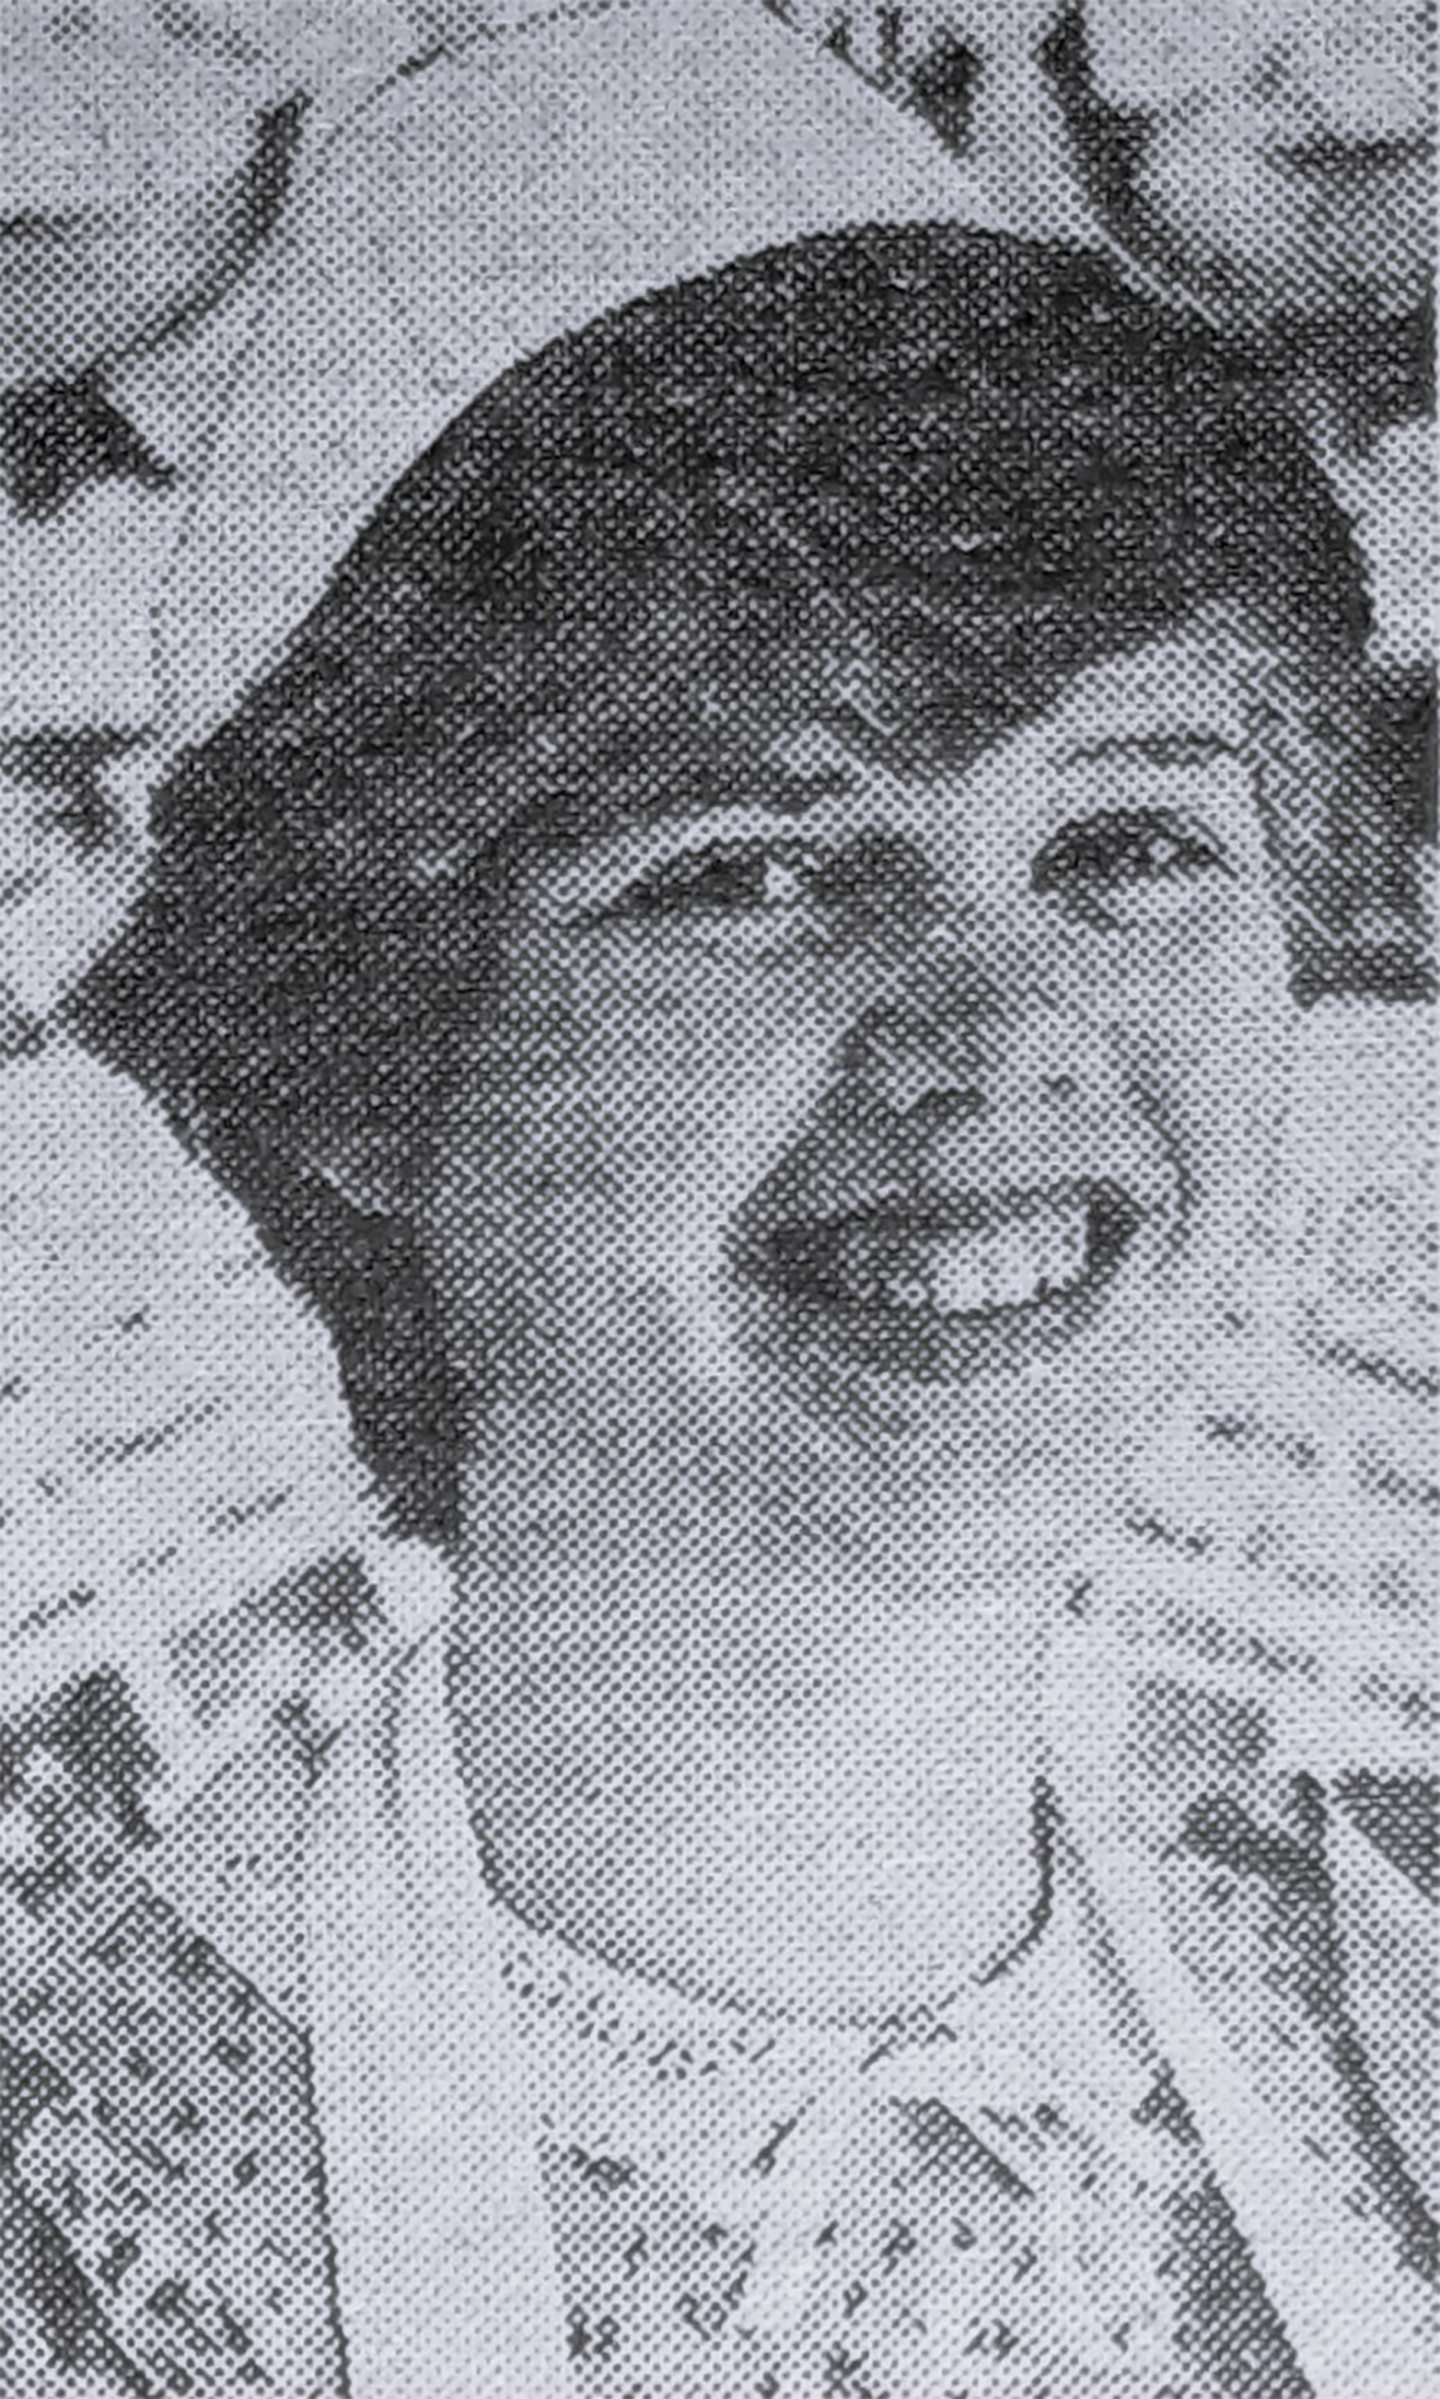 A headshot of Sandra Hutchison, who was behind the counter at Jacanoni's.